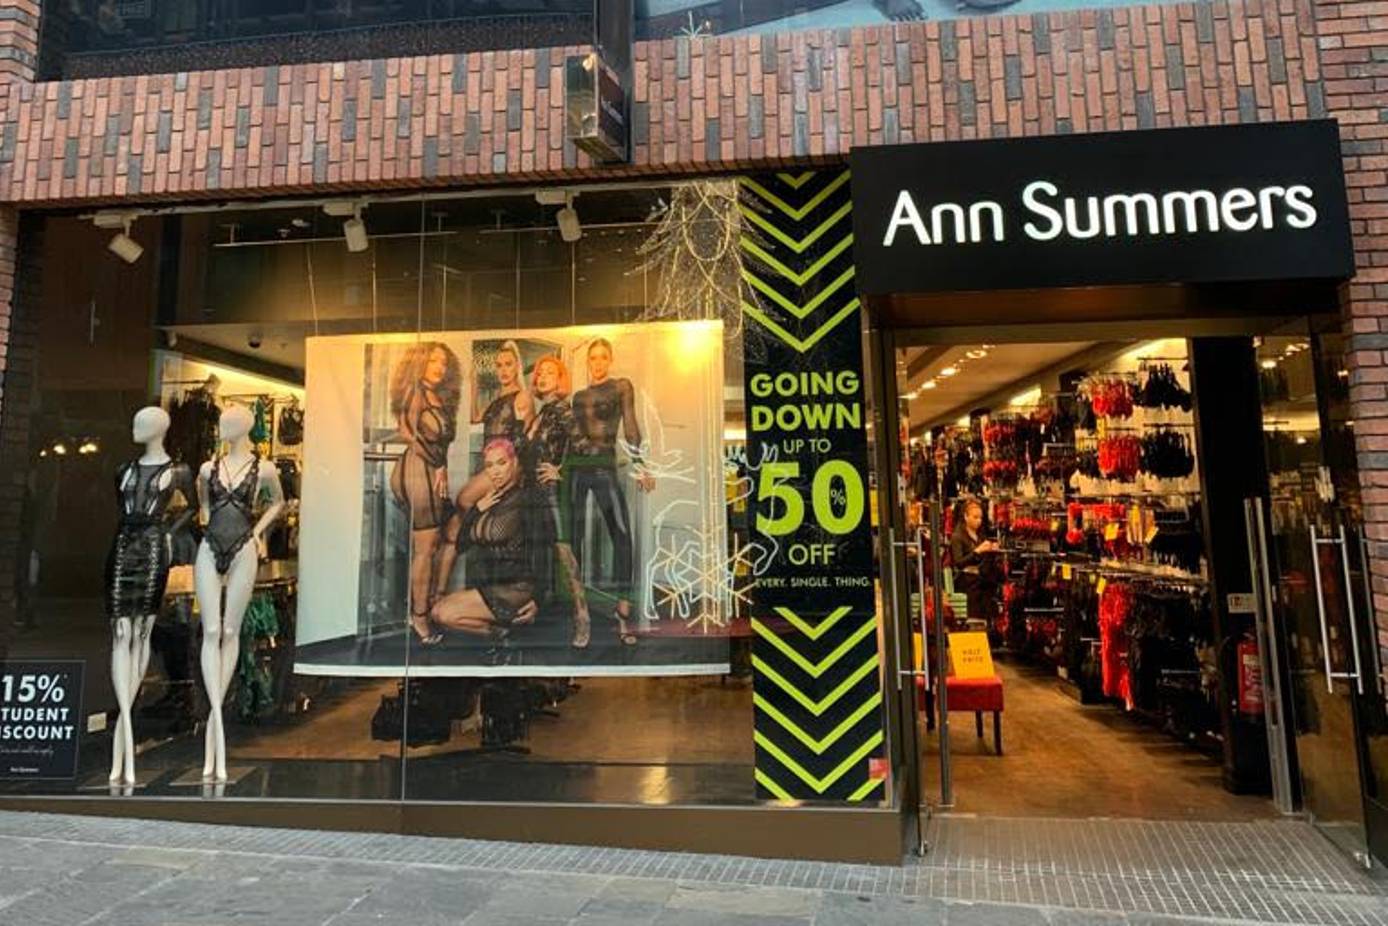 Ann Summers reduces losses